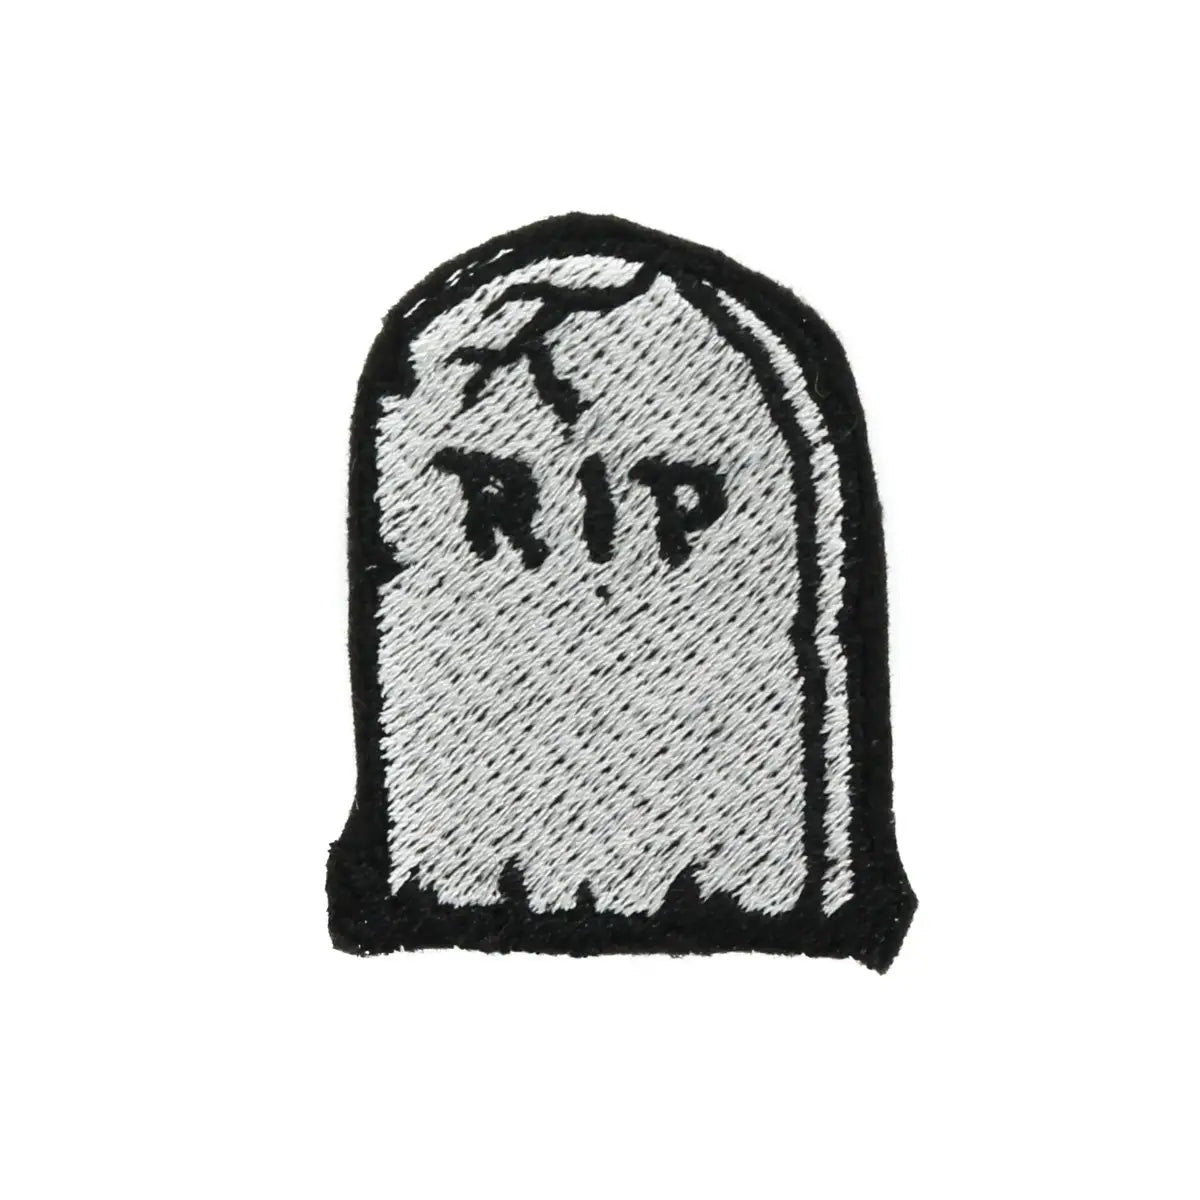 embroidered patch of an old cracked tombstone, with the inscription “RIP”. Black and grey stitching